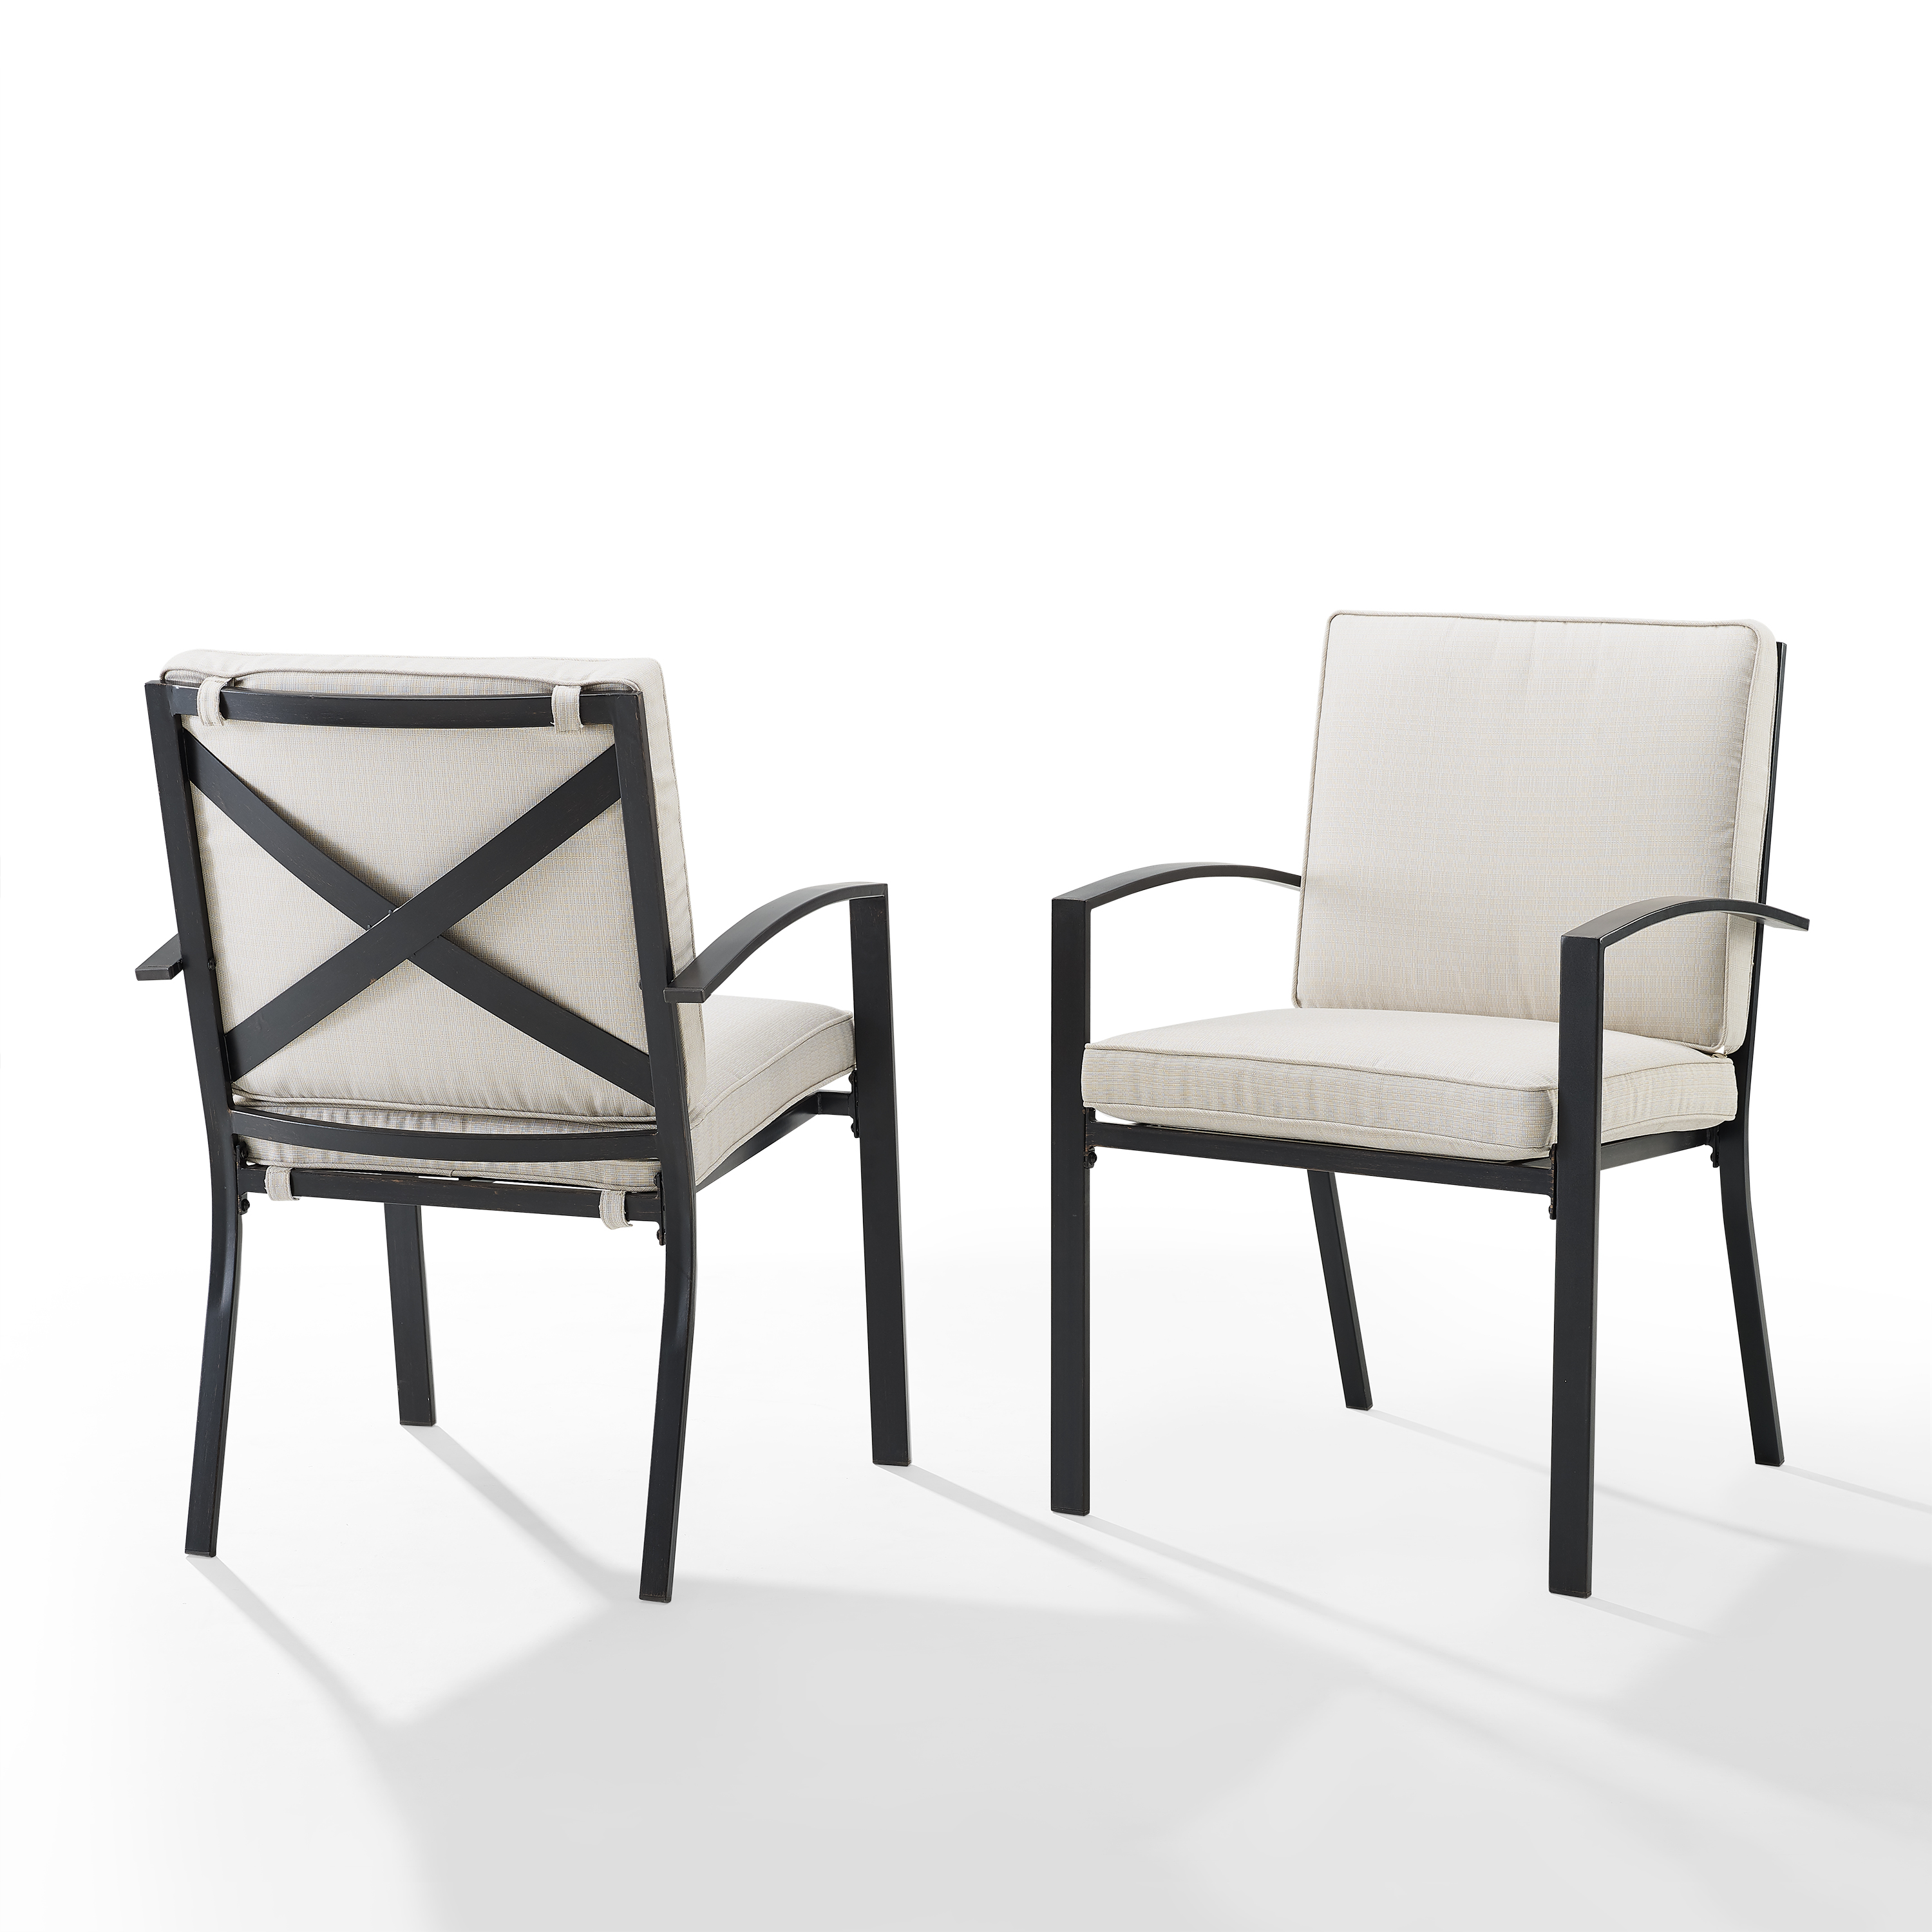 Crosley Furniture Kaplan Fabric Outdoor Dining Chair Set in Oatmeal (Set of 2) - image 1 of 12